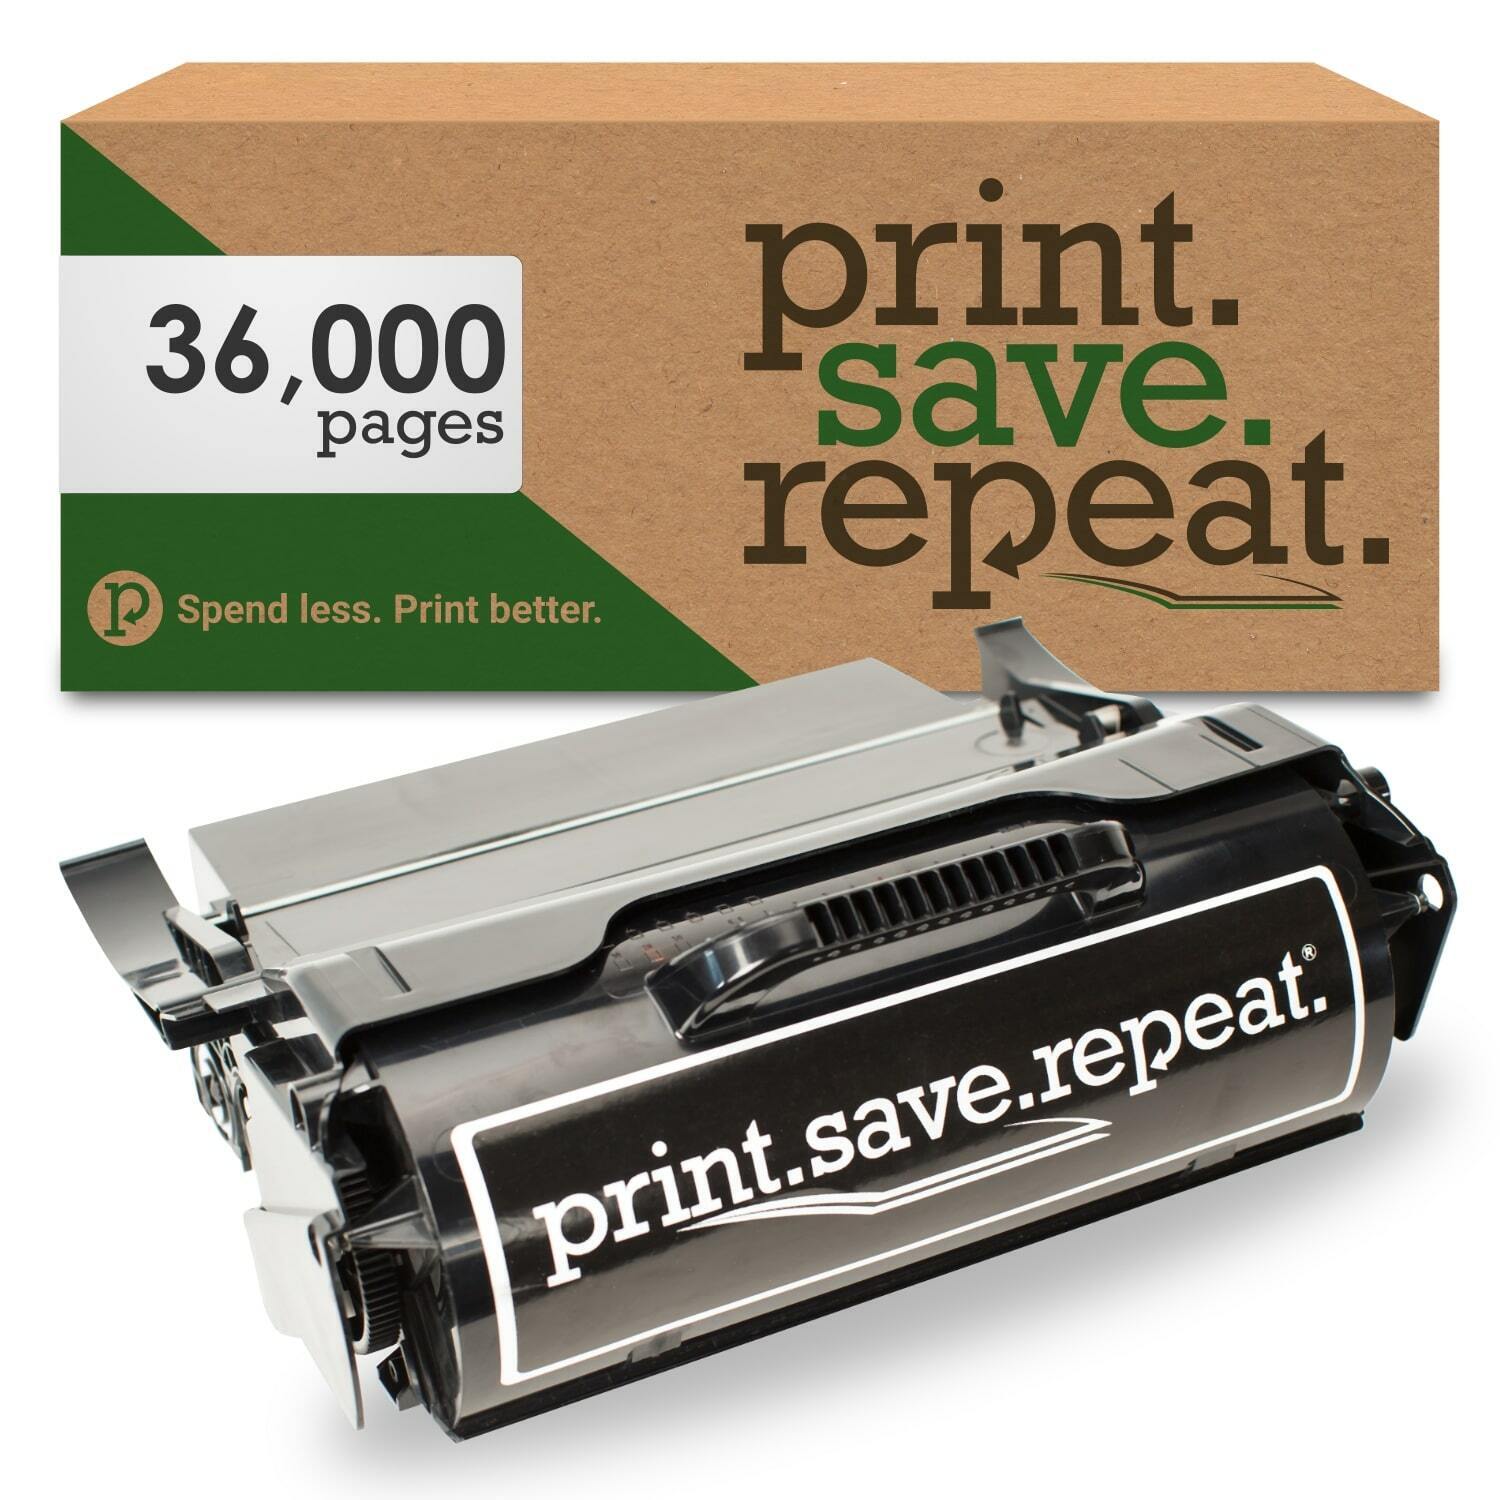 Print.Save.Repeat. Lexmark 24B4899 Toner Cartridge for XS654, XS658 [36K Pages]